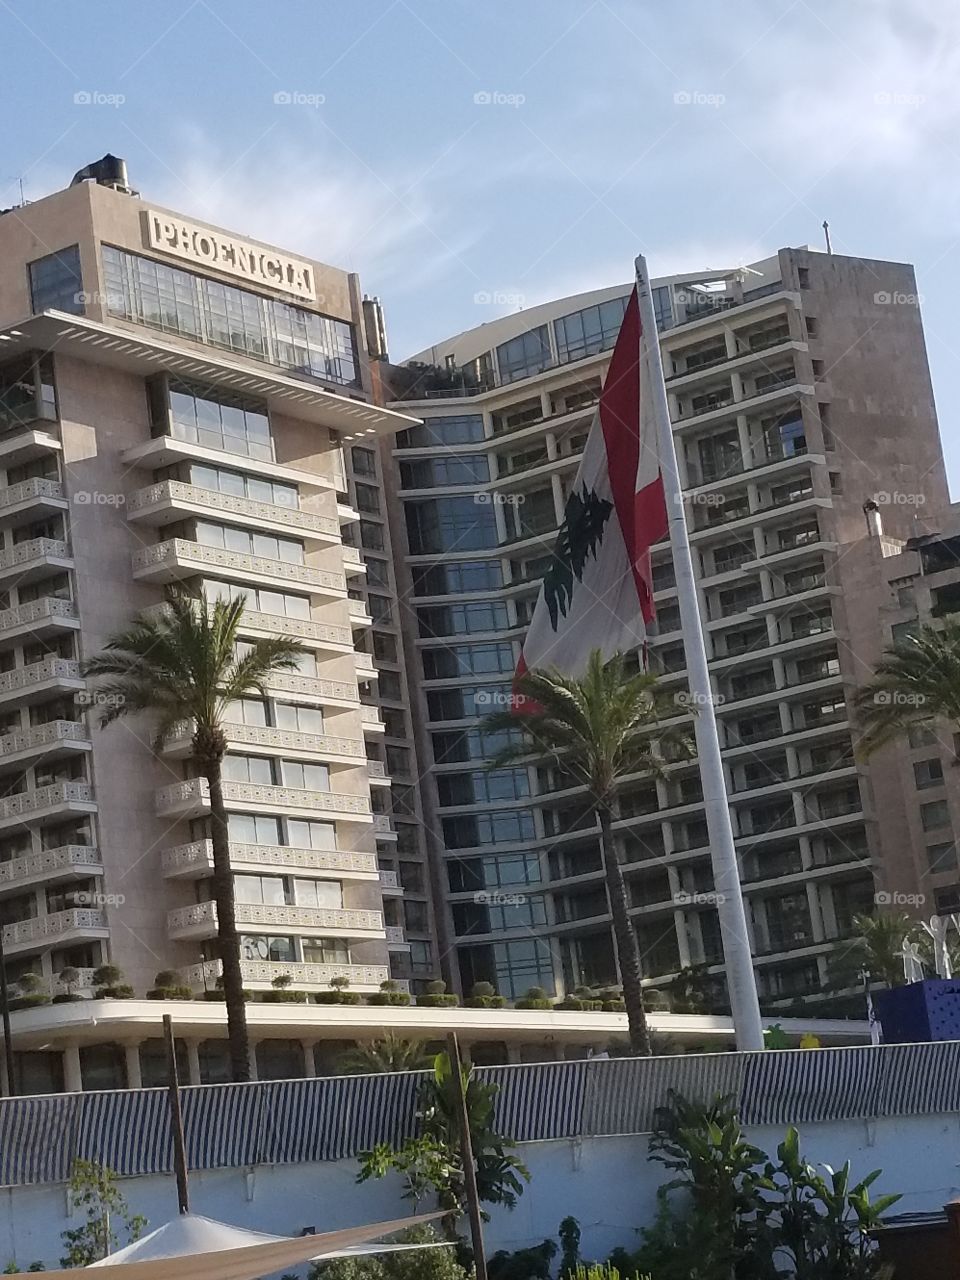 Zaitunay Bay, located around Beirut Marina, is owned and managed by Beirut Waterfront Development Company, a 50-50 joint venture between Solidere and Stow Development Company. Access to the project is through the seaside promenade to the north, the planned Rafic Hariri Wahat waterside city park to the east, and the Beirut corniche to the south. A 400-space underground public car park was built by Solidere below the corniche